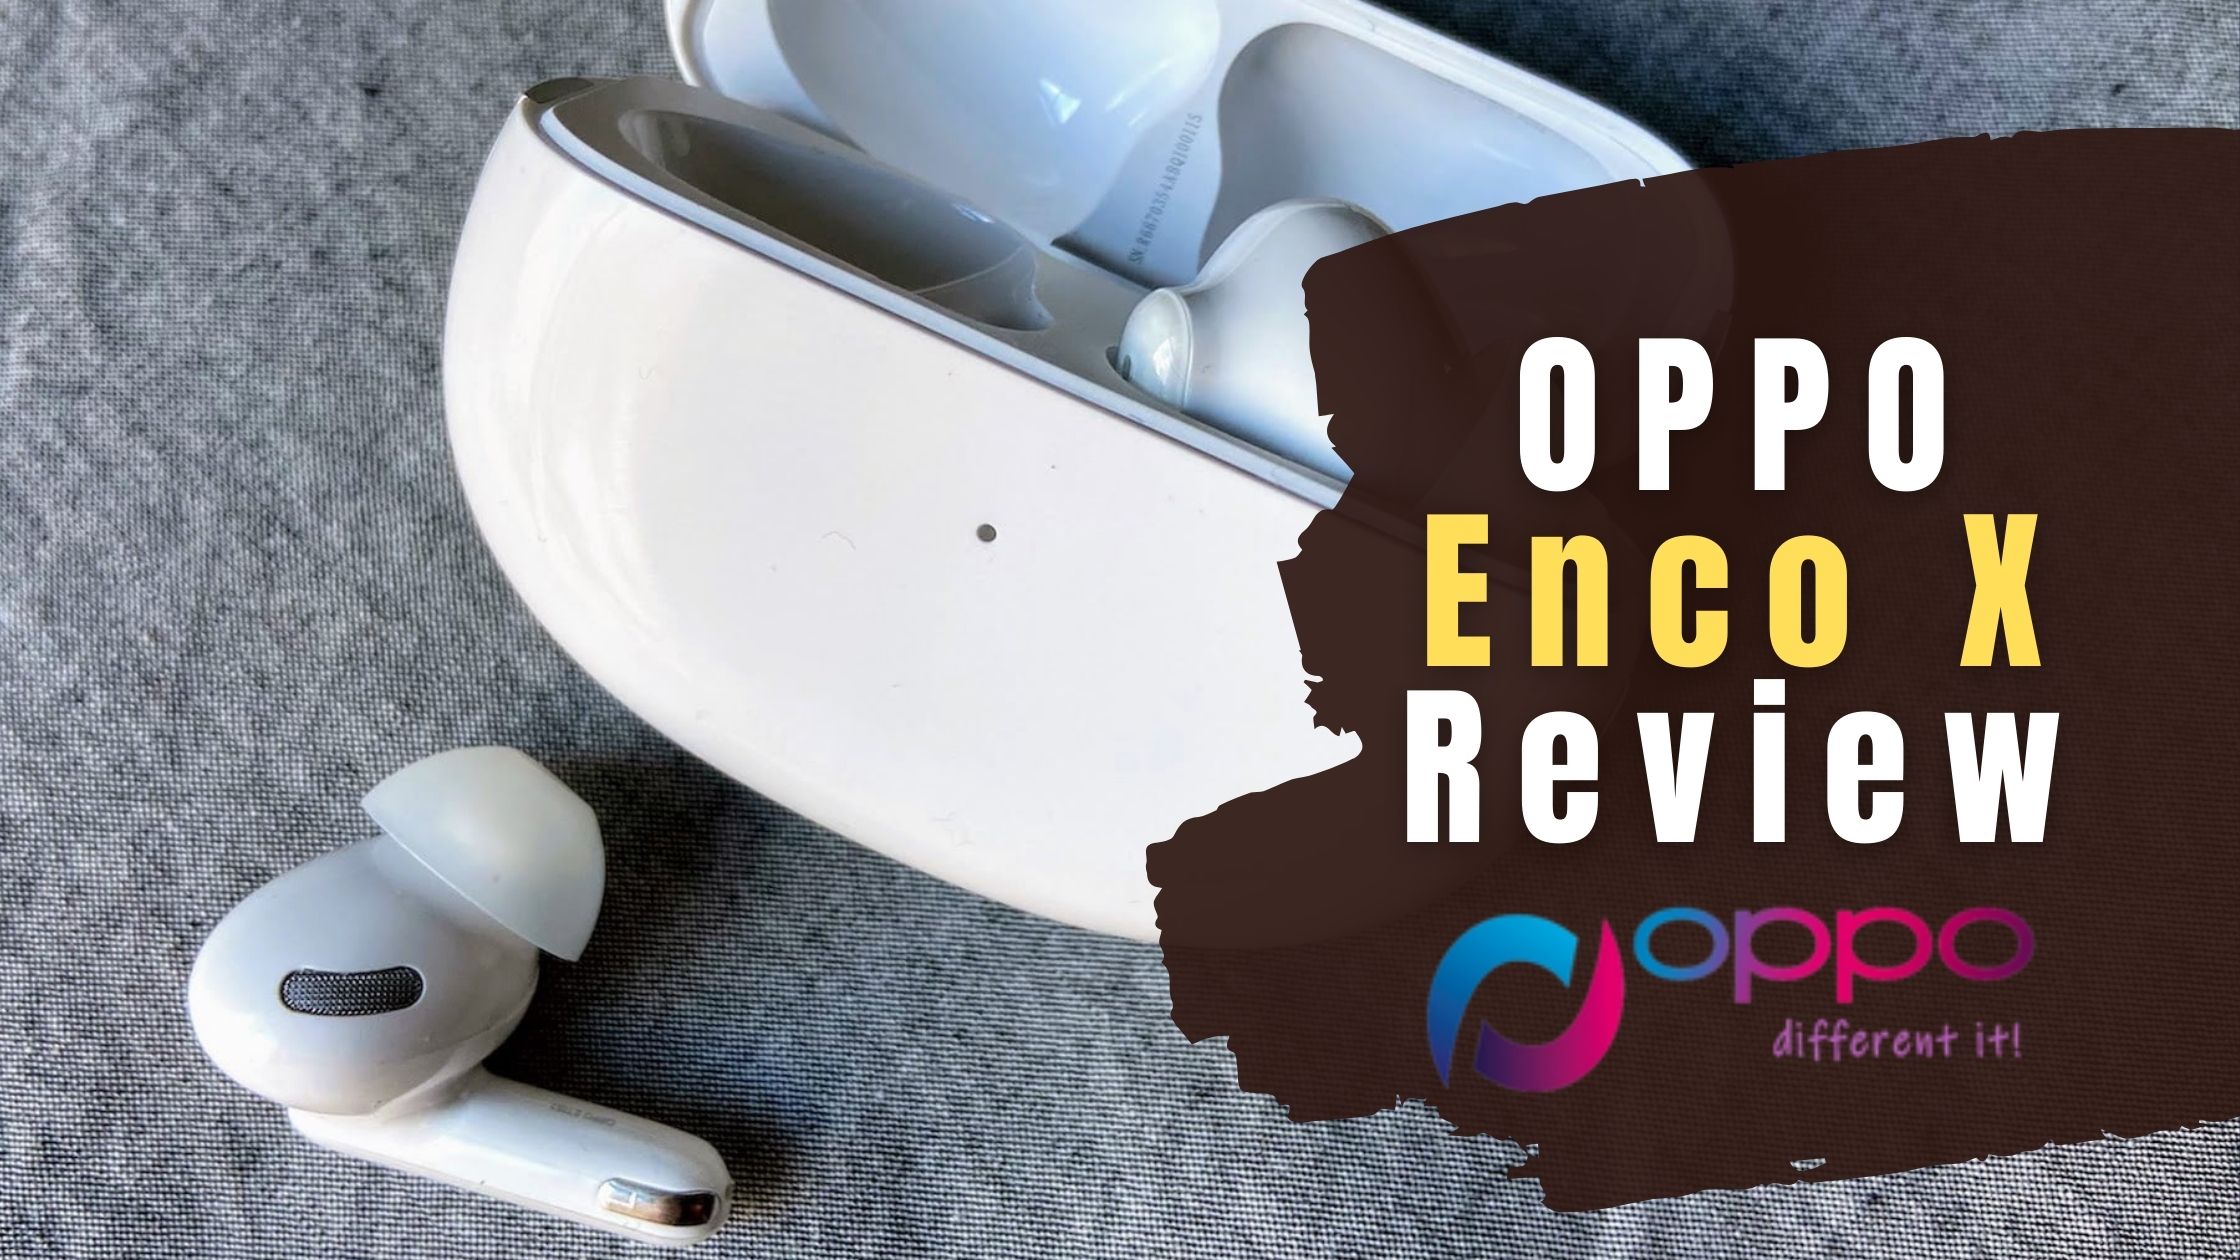 OPPO Enco X Review: A High-Quality Wireless Earphone with Exceptional Sound Performance